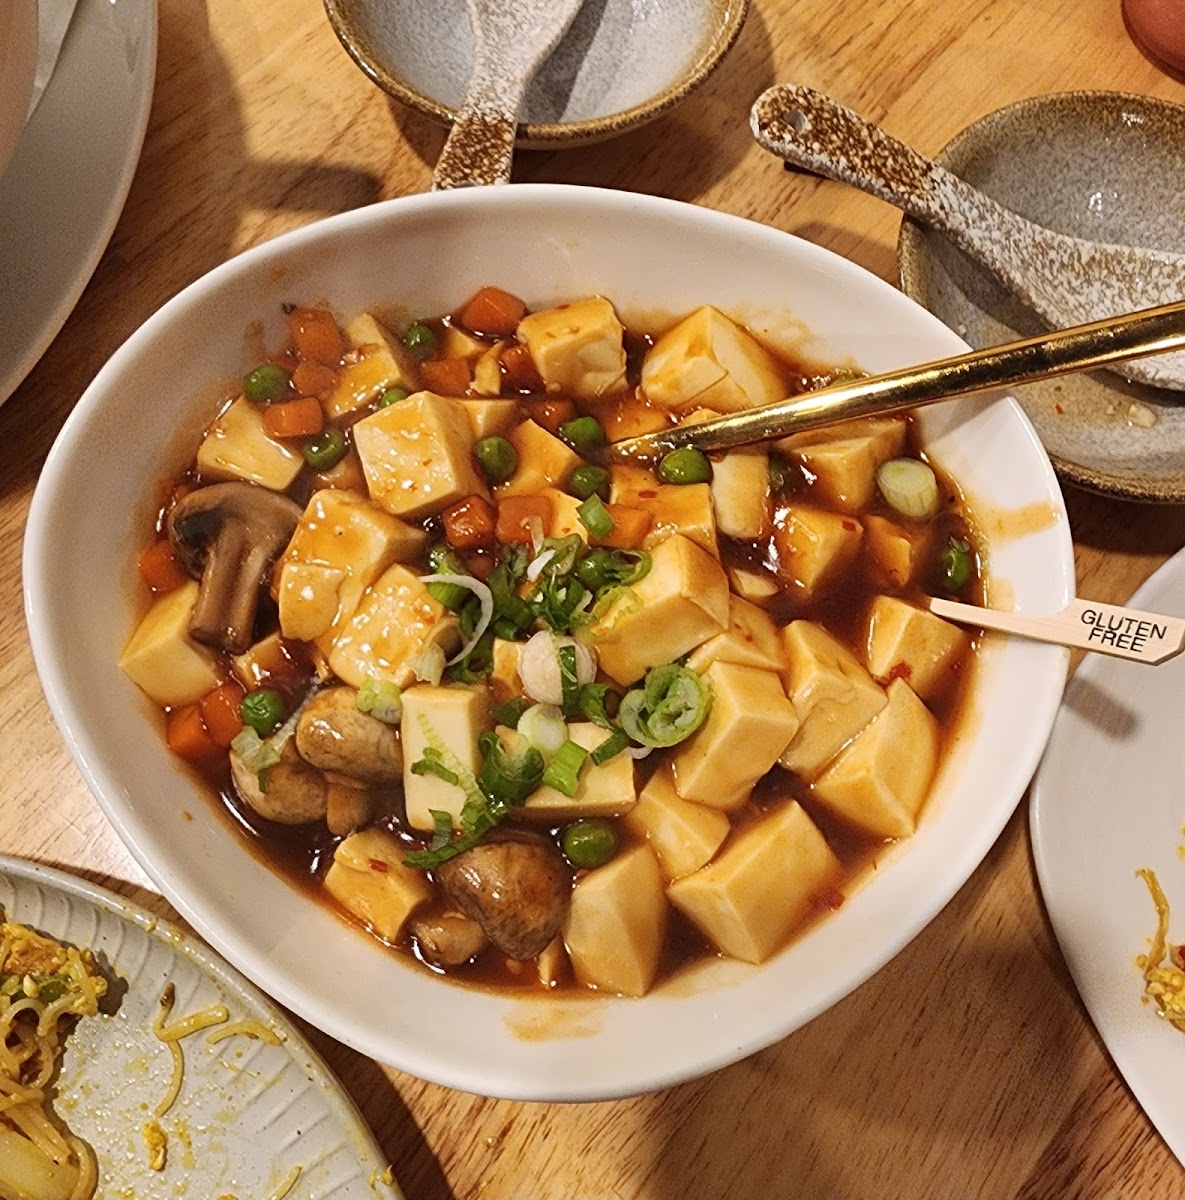 Mapo tofu, be cautious of tofu in other dishes which I believe is fried in a shared fryer. The server said the mapo tofu is okay because it's not fried. It was so good!